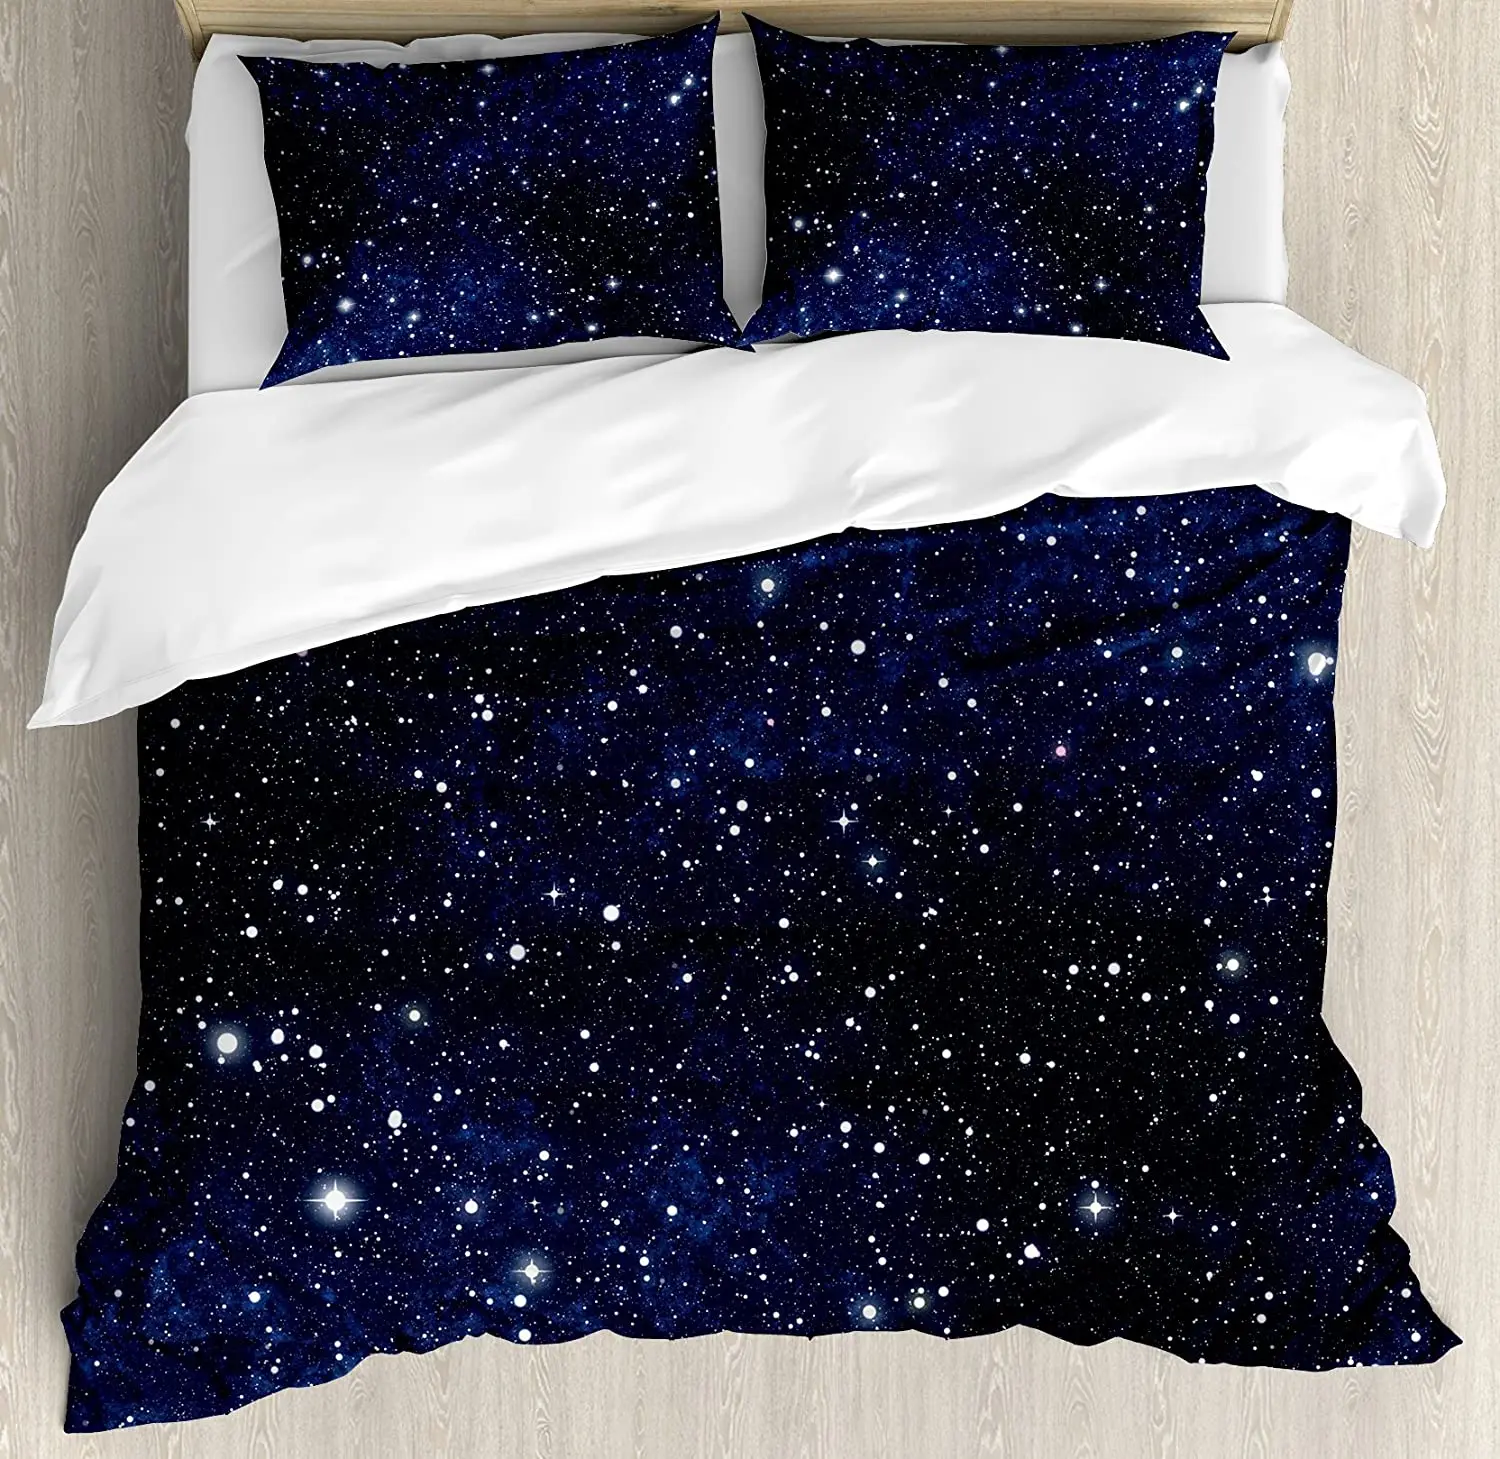 

Night Bedding Set For Bedroom Bed Home Star Filled Dark Sky Vivid Celestial Theme Cosmos Duvet Cover Quilt Cover And Pillowcase